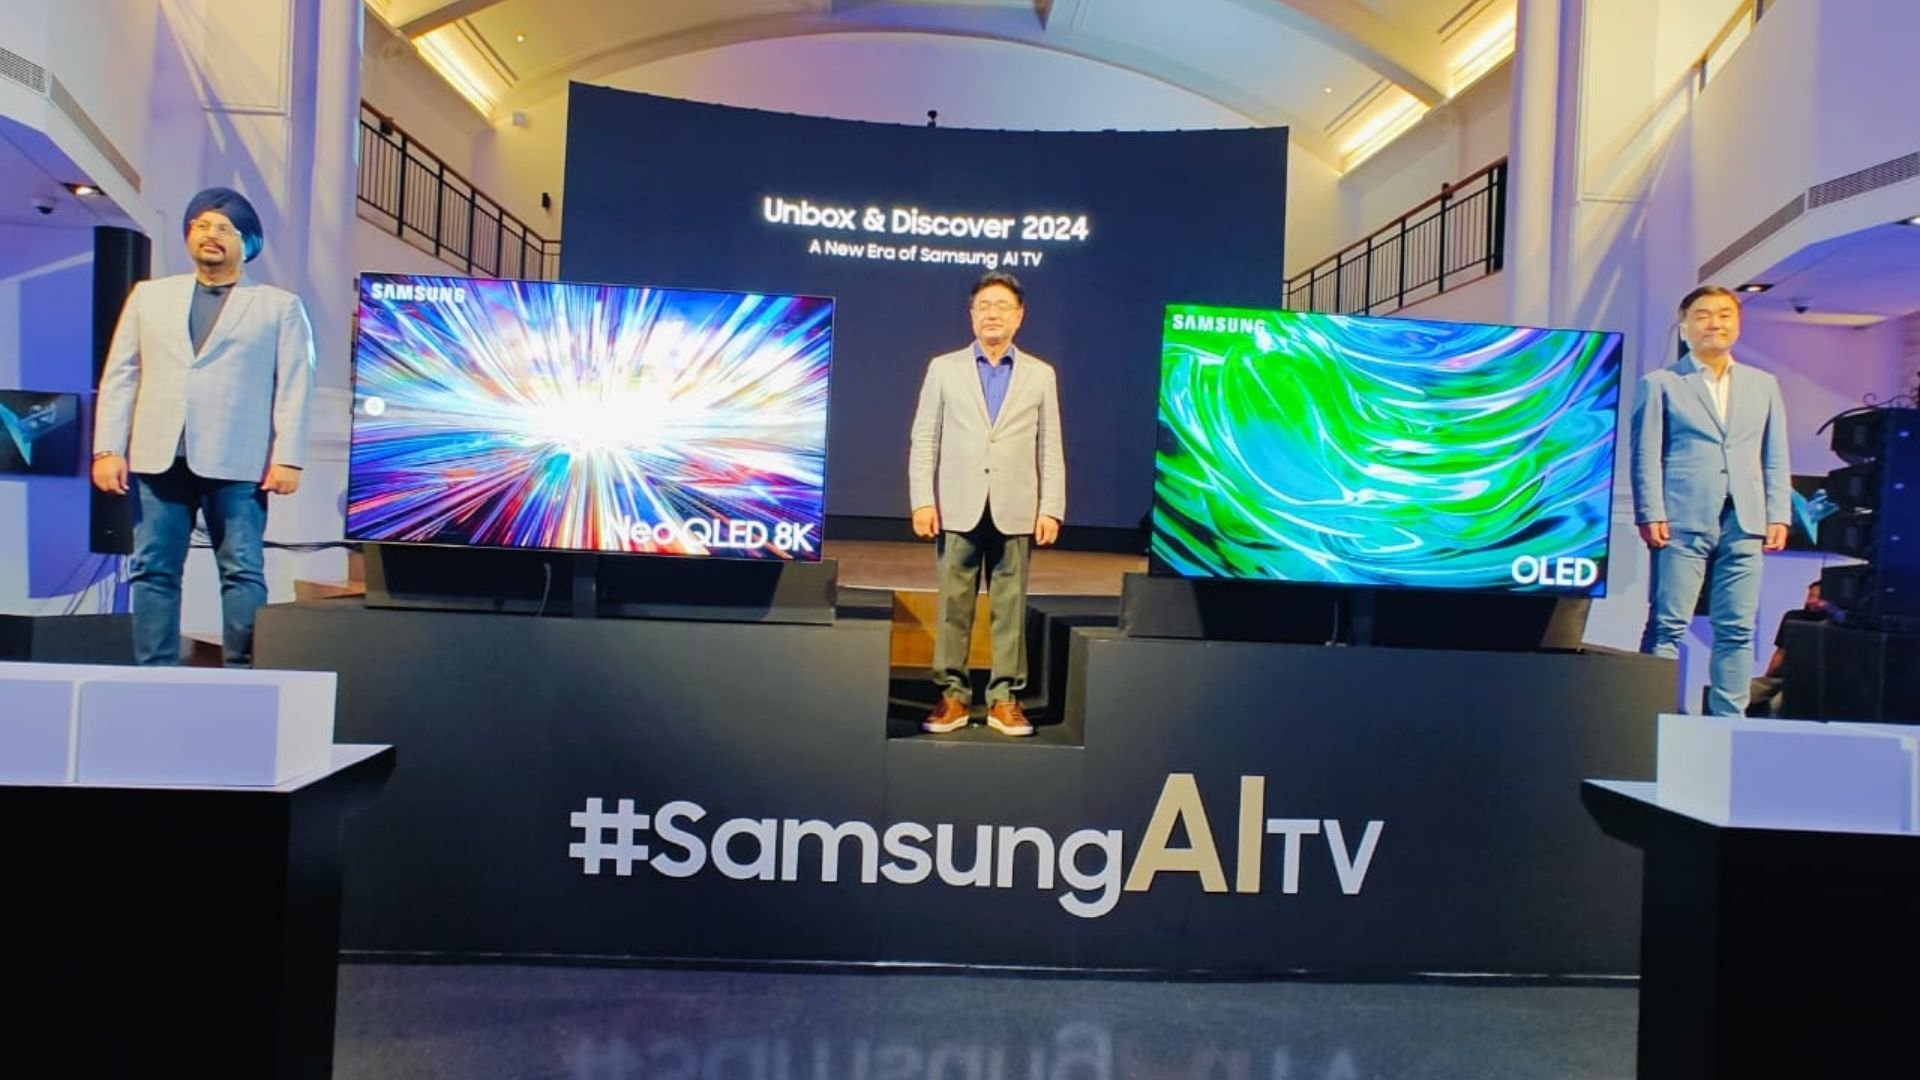 Samsung Launches AI-Powered Neo QLED 8K, 4K And OLED TVs In India; Can You Guess The Price